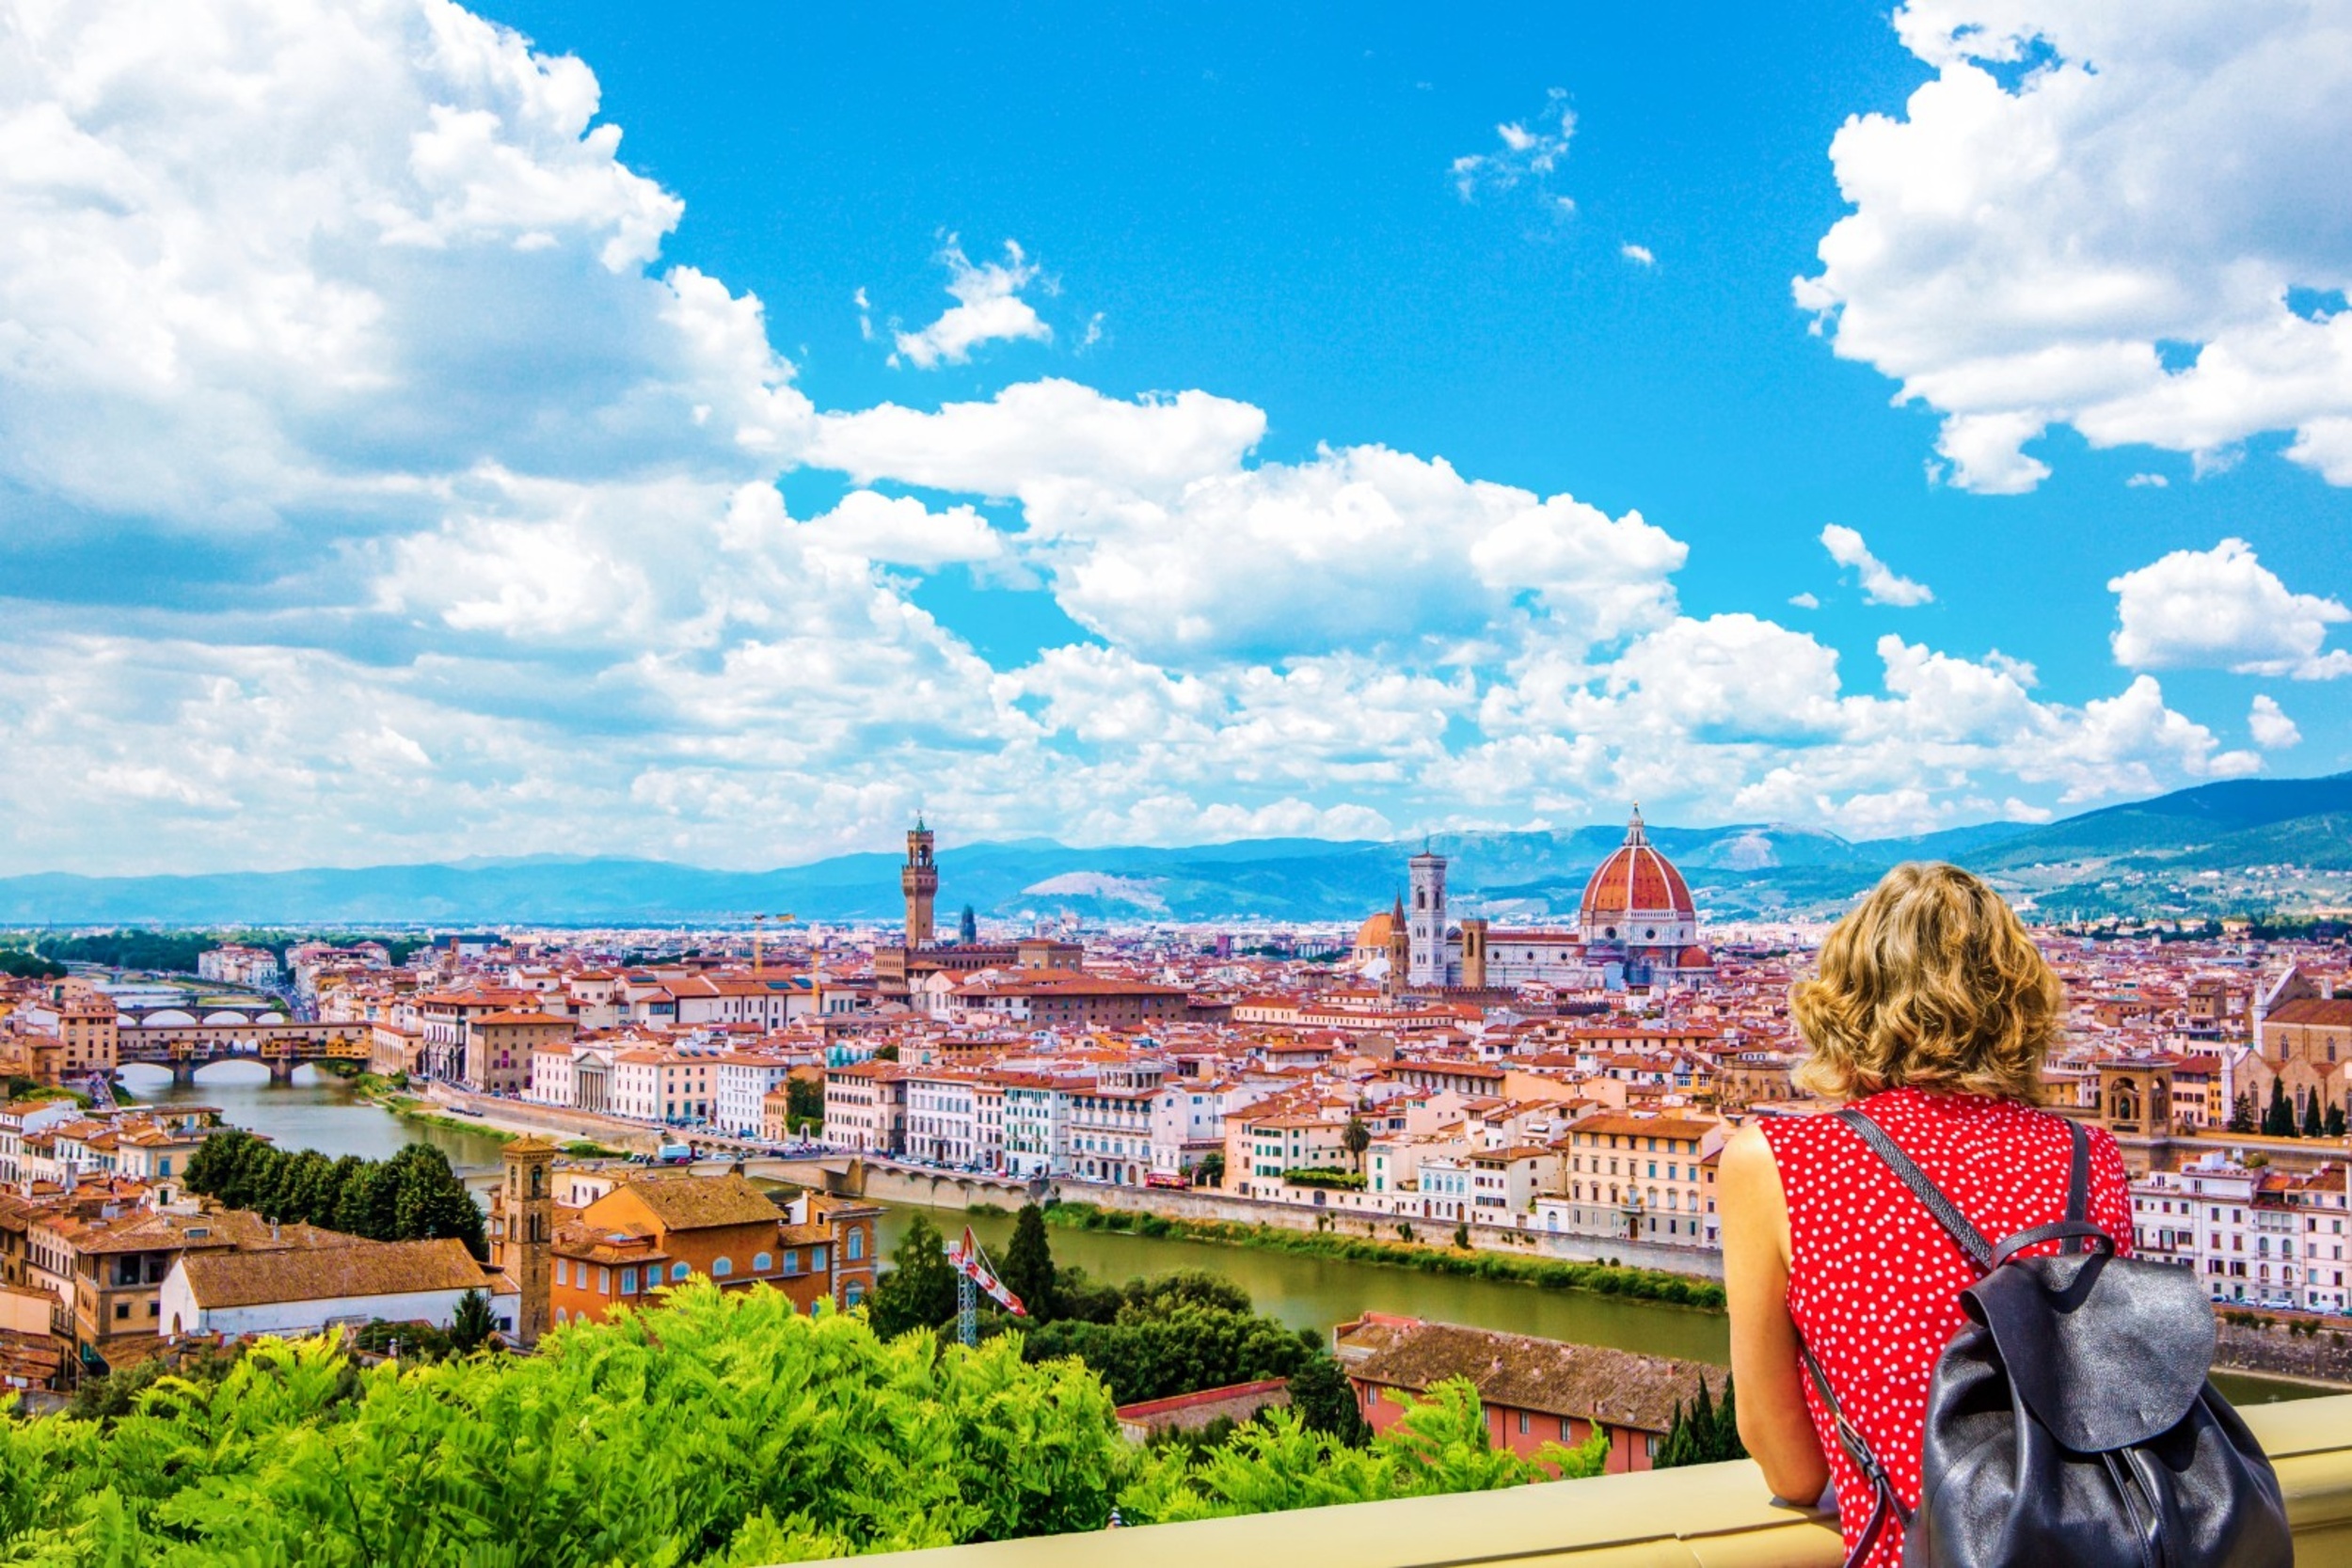 <p>Speaking of views, there's only one place where you can get a panoramic view of the whole city. Piazza Michelangelo offers a view of the countryside, the Duomo, Arno and Palazzo Vecchio, and all those magnificent houses in between. </p><p>You may also like: <a href='https://www.yardbarker.com/lifestyle/articles/15_amazing_train_rides_across_the_us_103123/s1__39017192'>15 amazing train rides across the US</a></p>